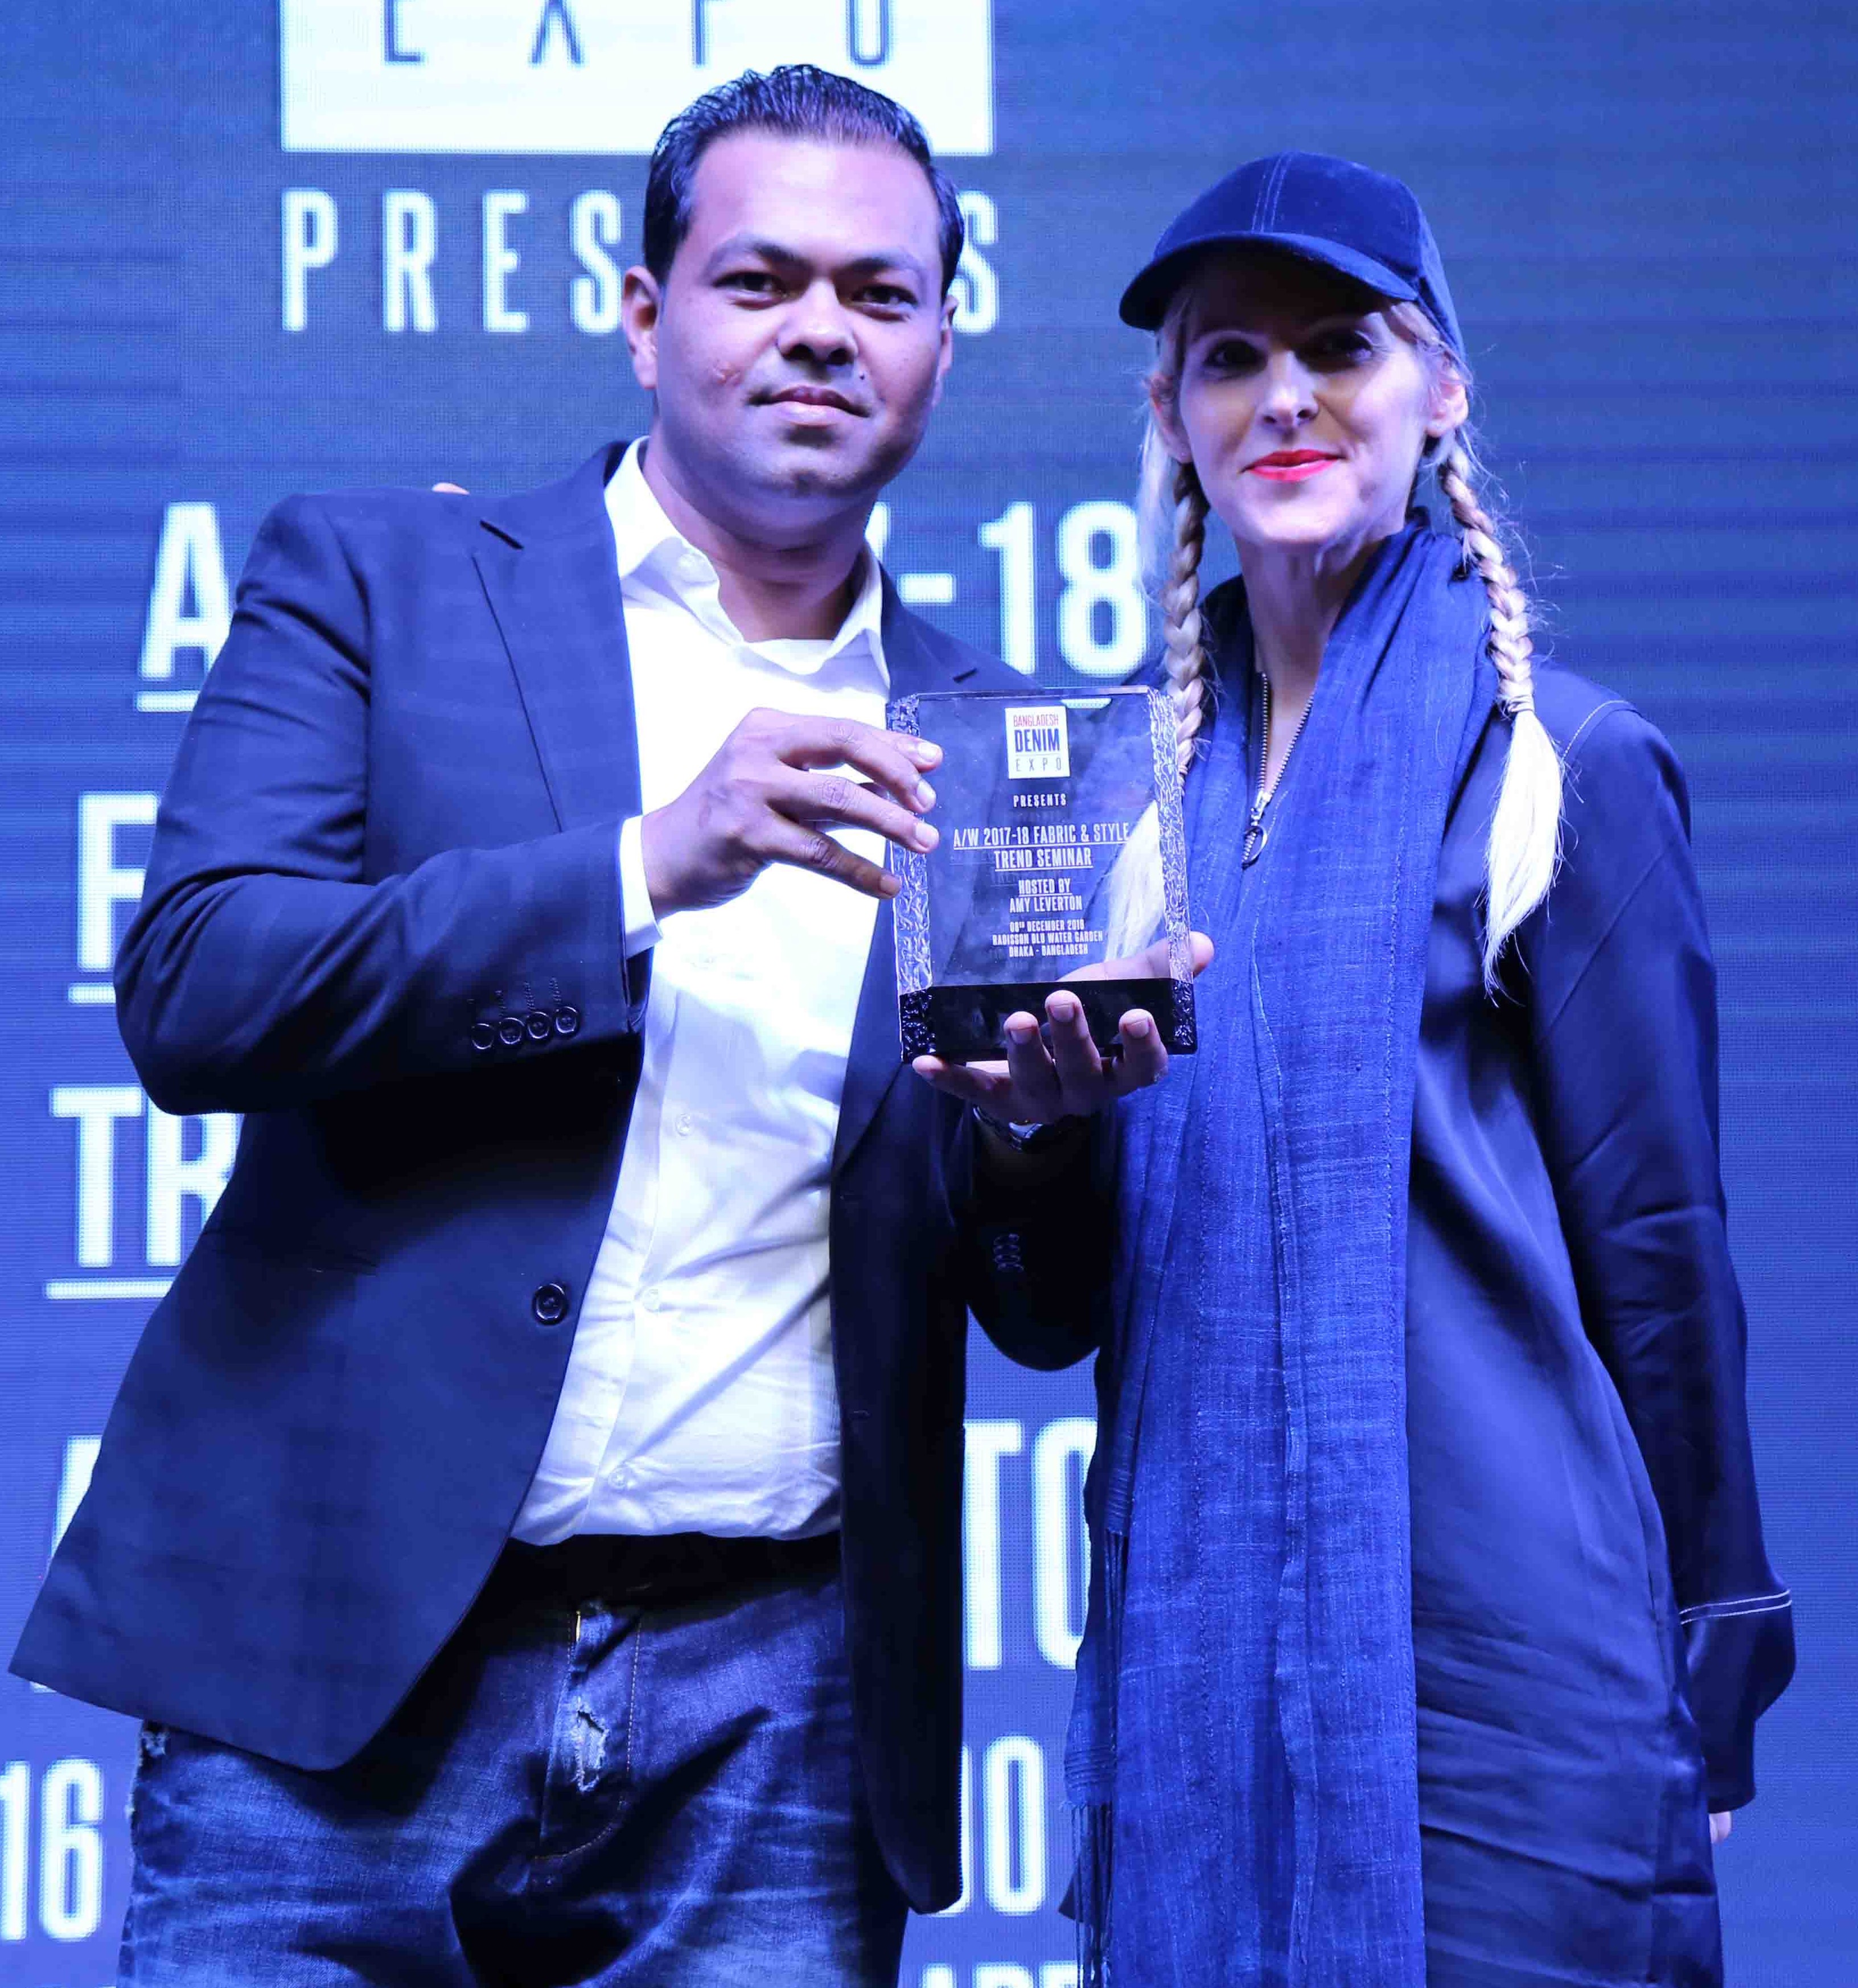 Md. Mostafiz Uddin, CEO and Founder of Bangladesh Denim Expo. id presenting crest to world renowned denim expert Ms. Amy Leverton 